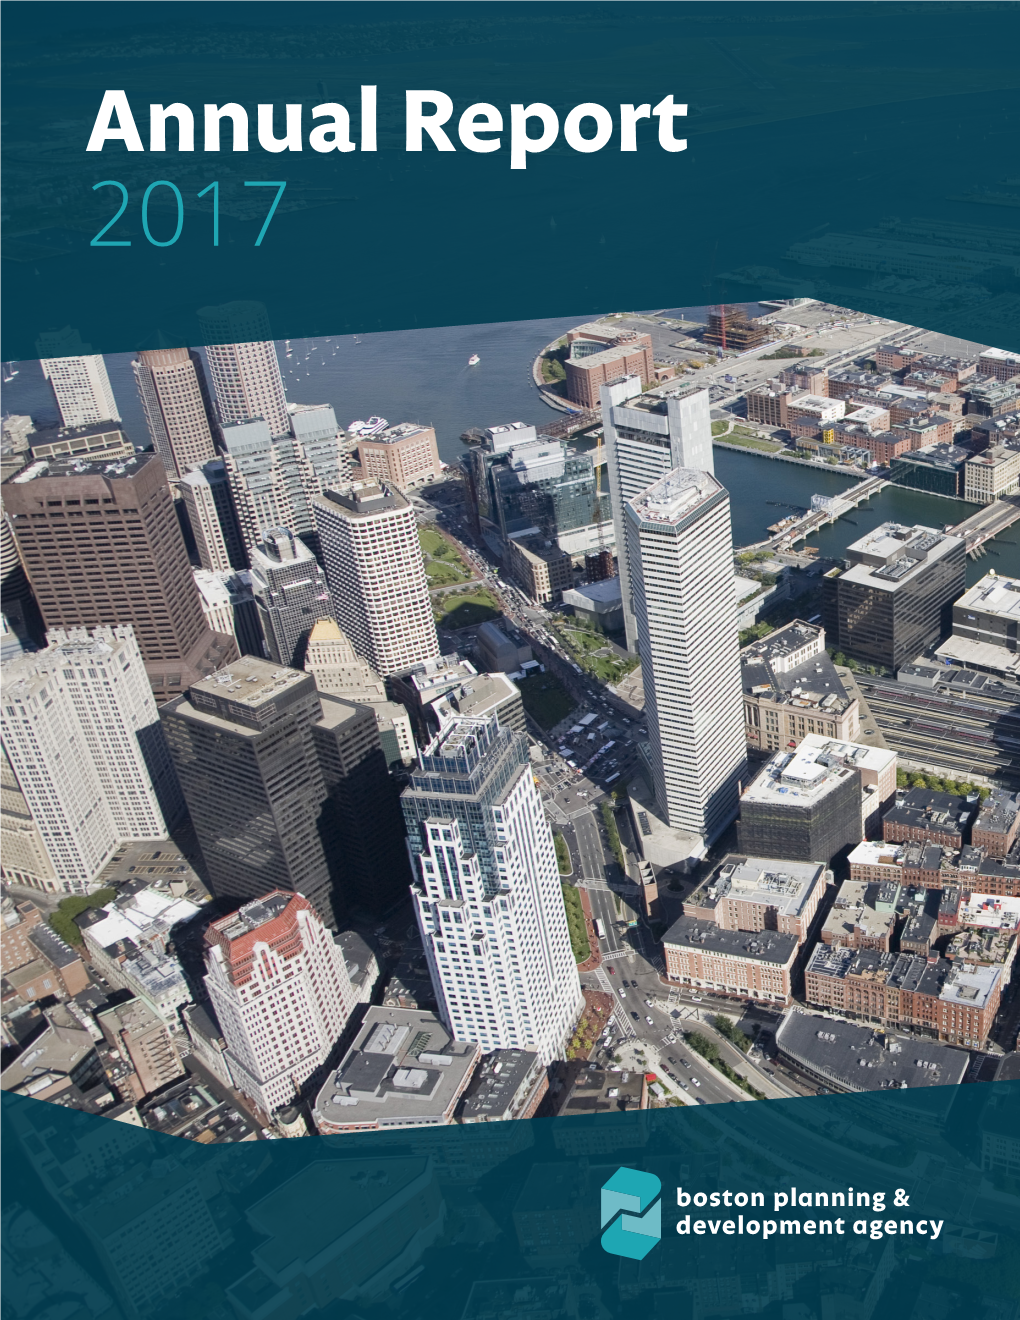 Annual Report 2017 2017 Marked a Productive Year Across the Boston Planning & Development Agency (BPDA)